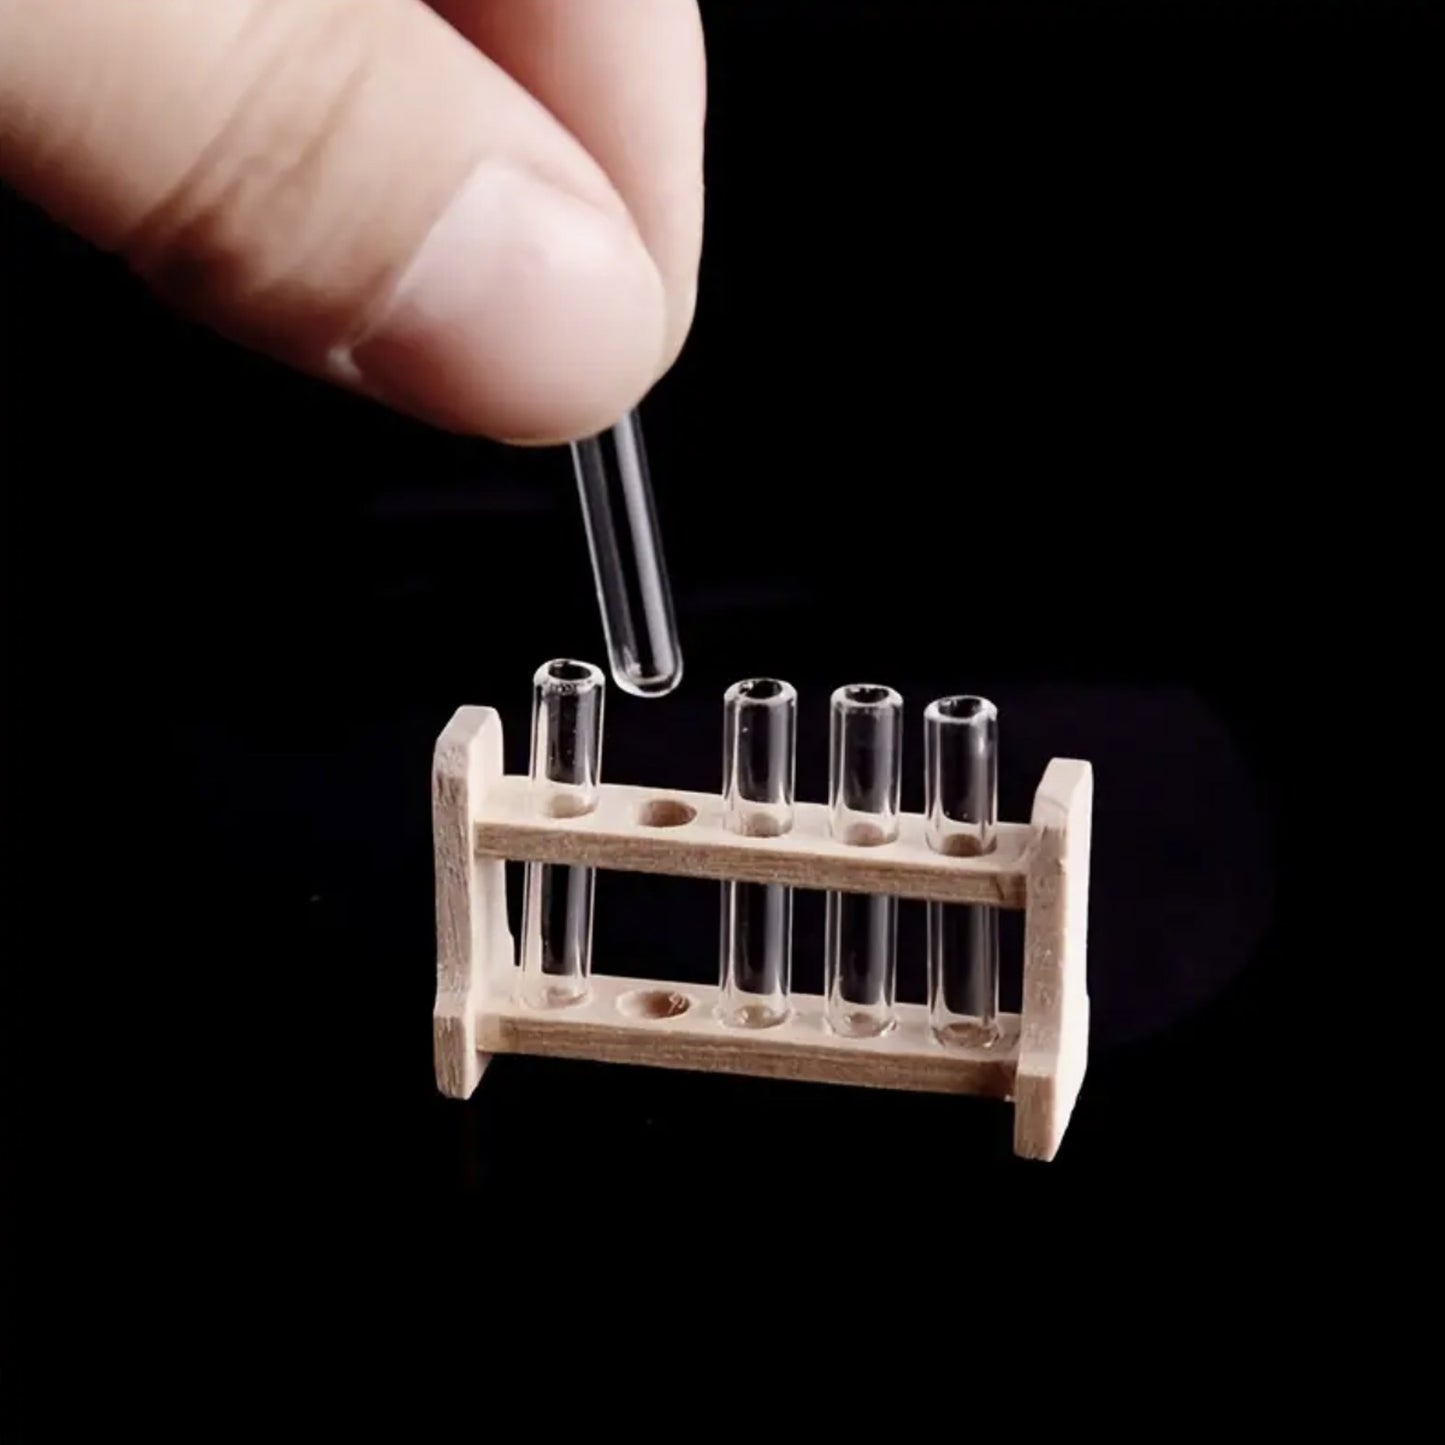 1 12 scale Dollhouse Test tube in hand